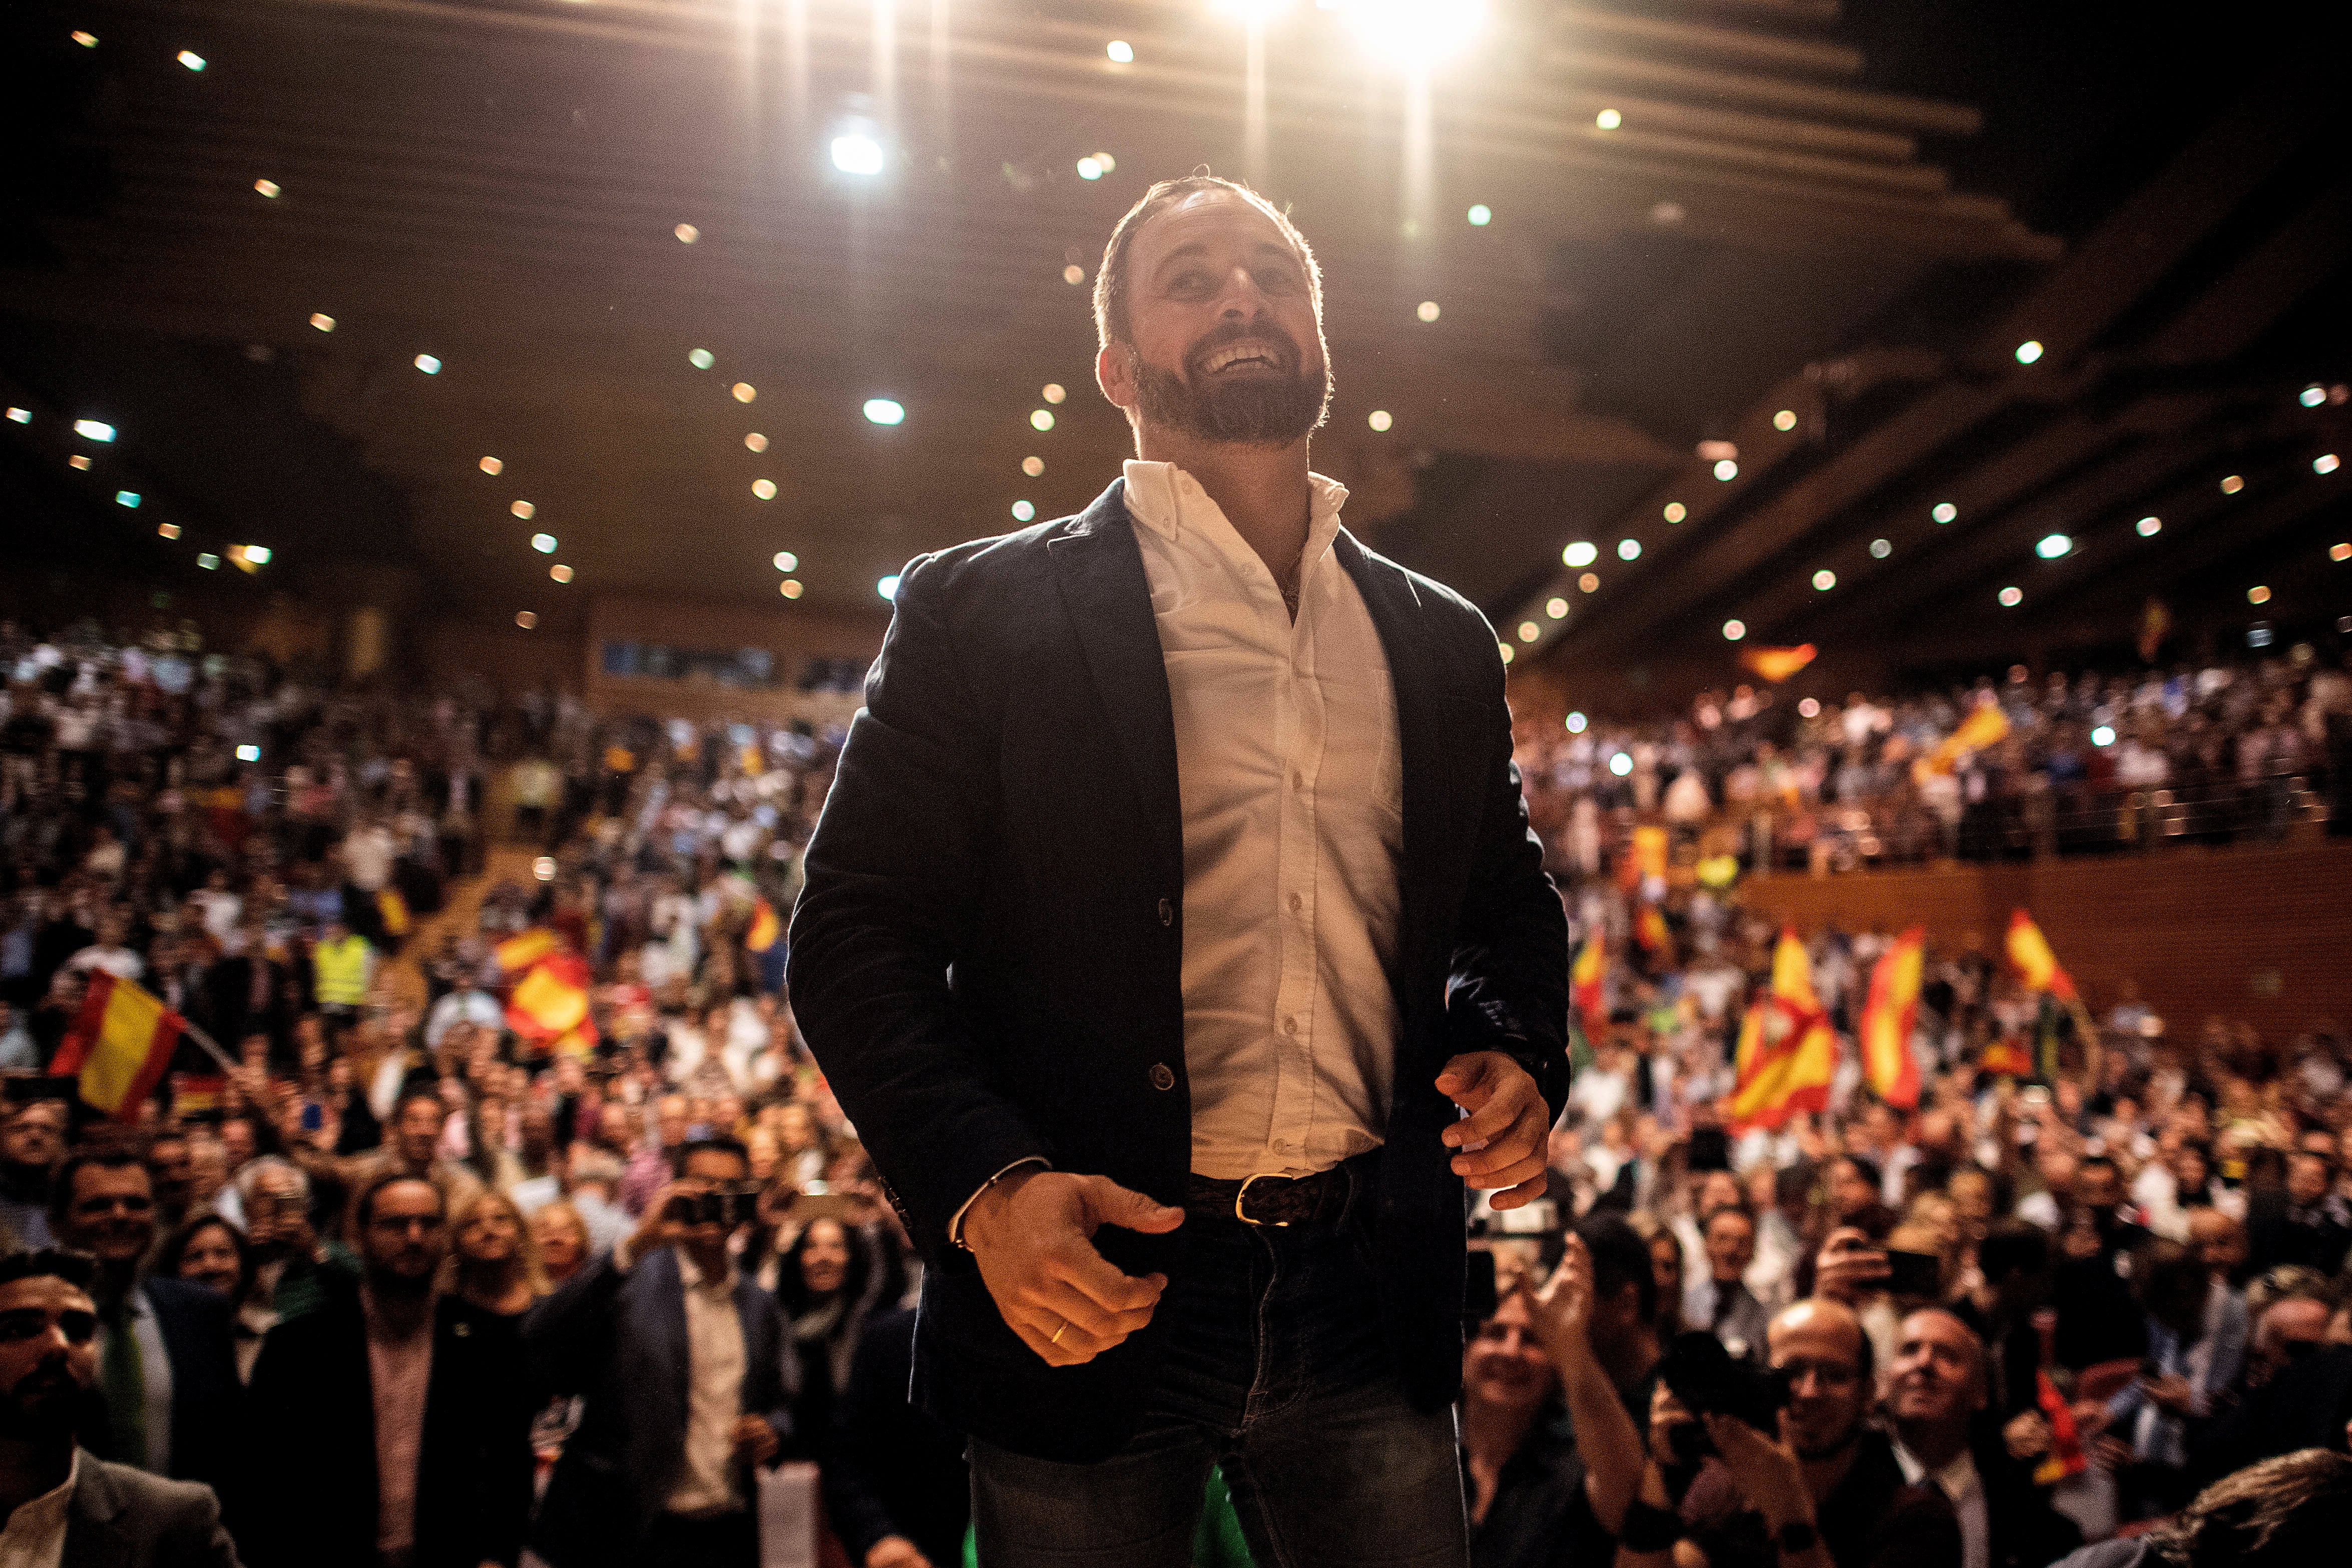 Abascal, a former PP councillor, became disillusioned with the party of which he was a member because of its drift to the political centre-ground